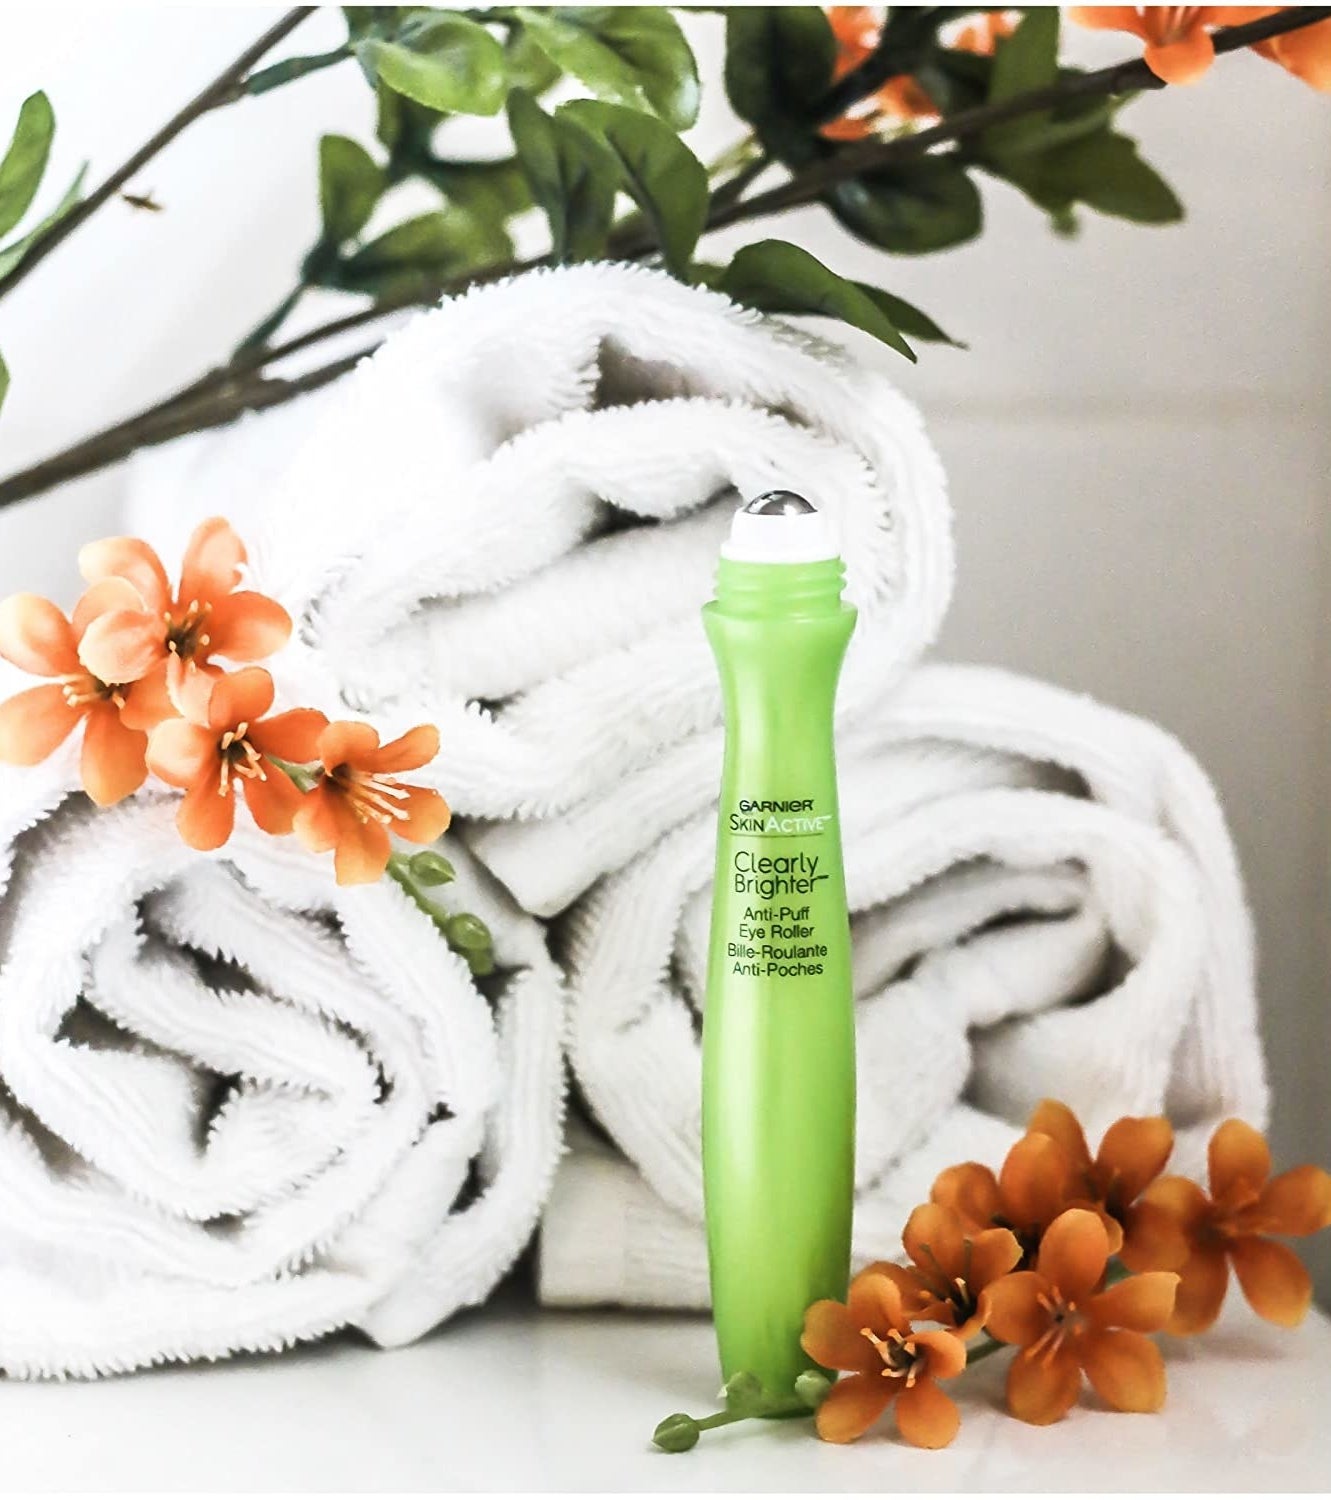 The Garnier SkinActive Clearly Brighter Anti-Puff Eye Roller